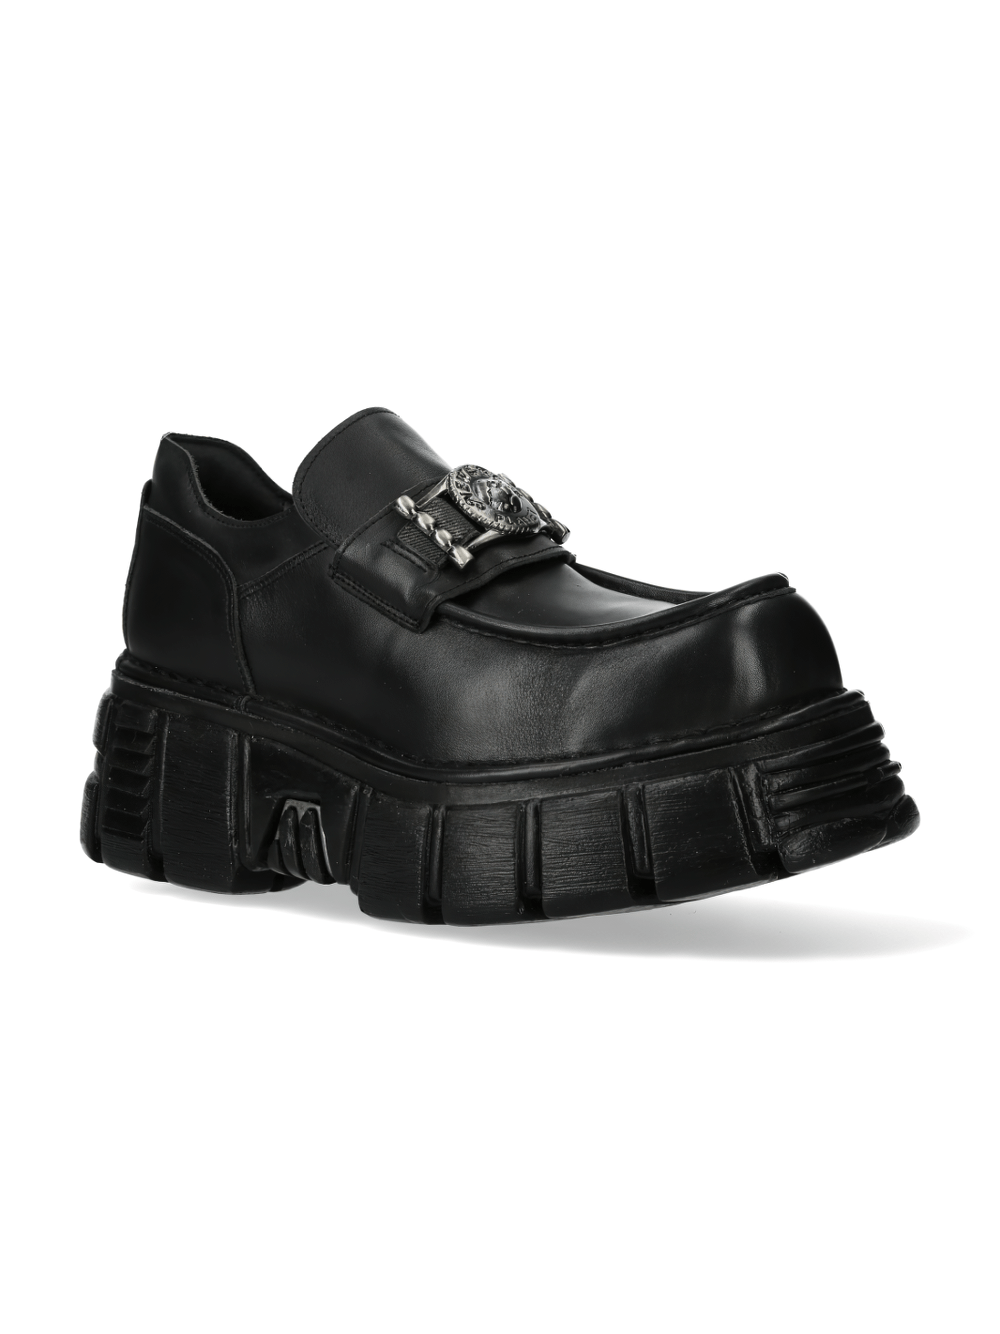 NEW ROCK Urban Rock Leather Platform Shoes With Buckle